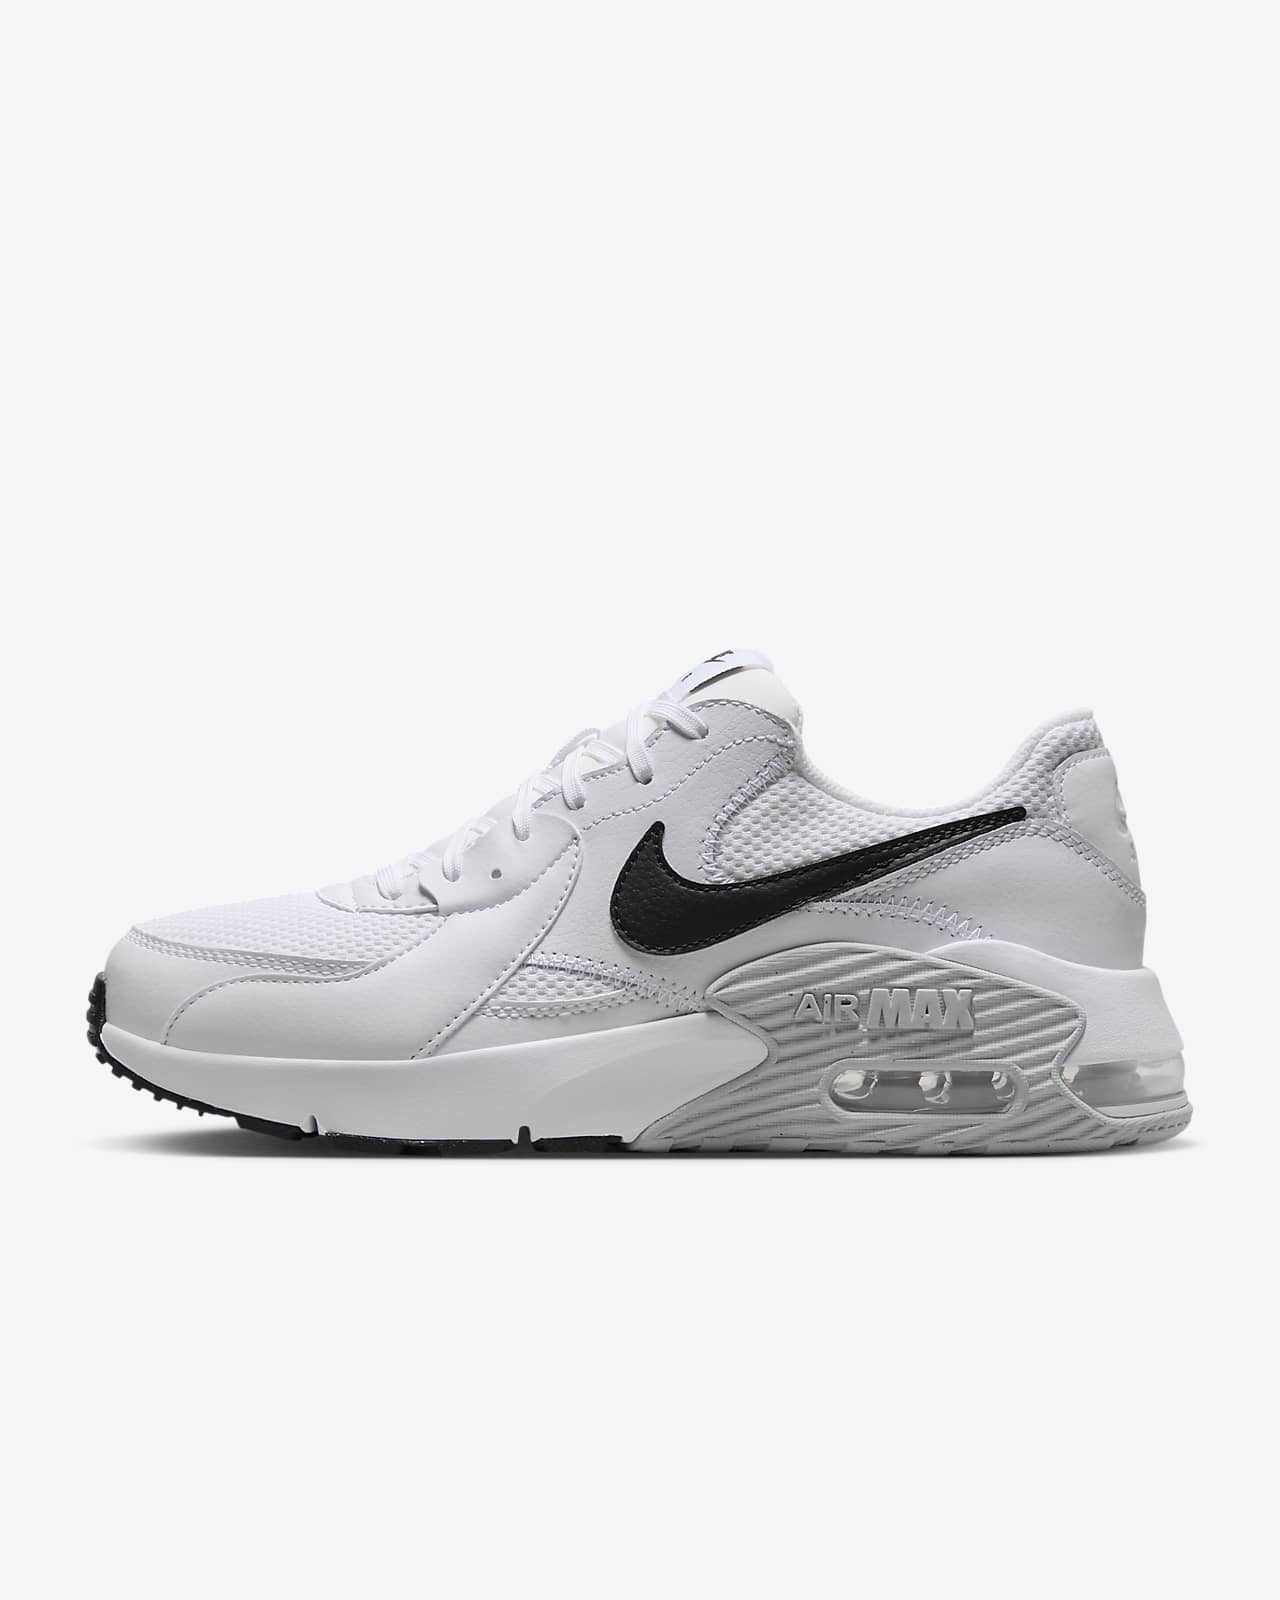 Nike Air Max Excee Women's Shoes عطر روز ماري باريس